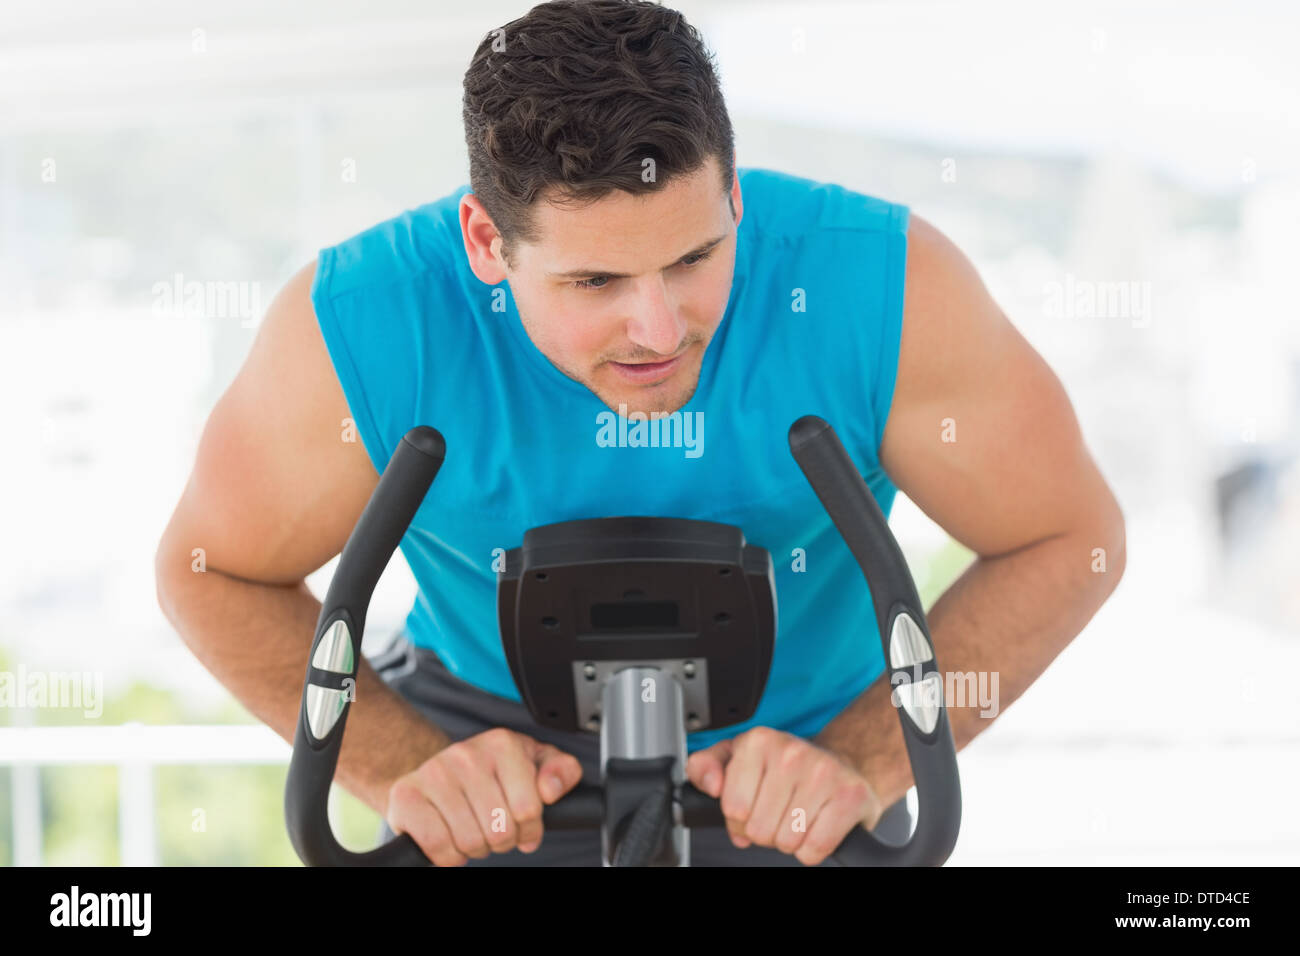 Serious man working out at spinning class Banque D'Images